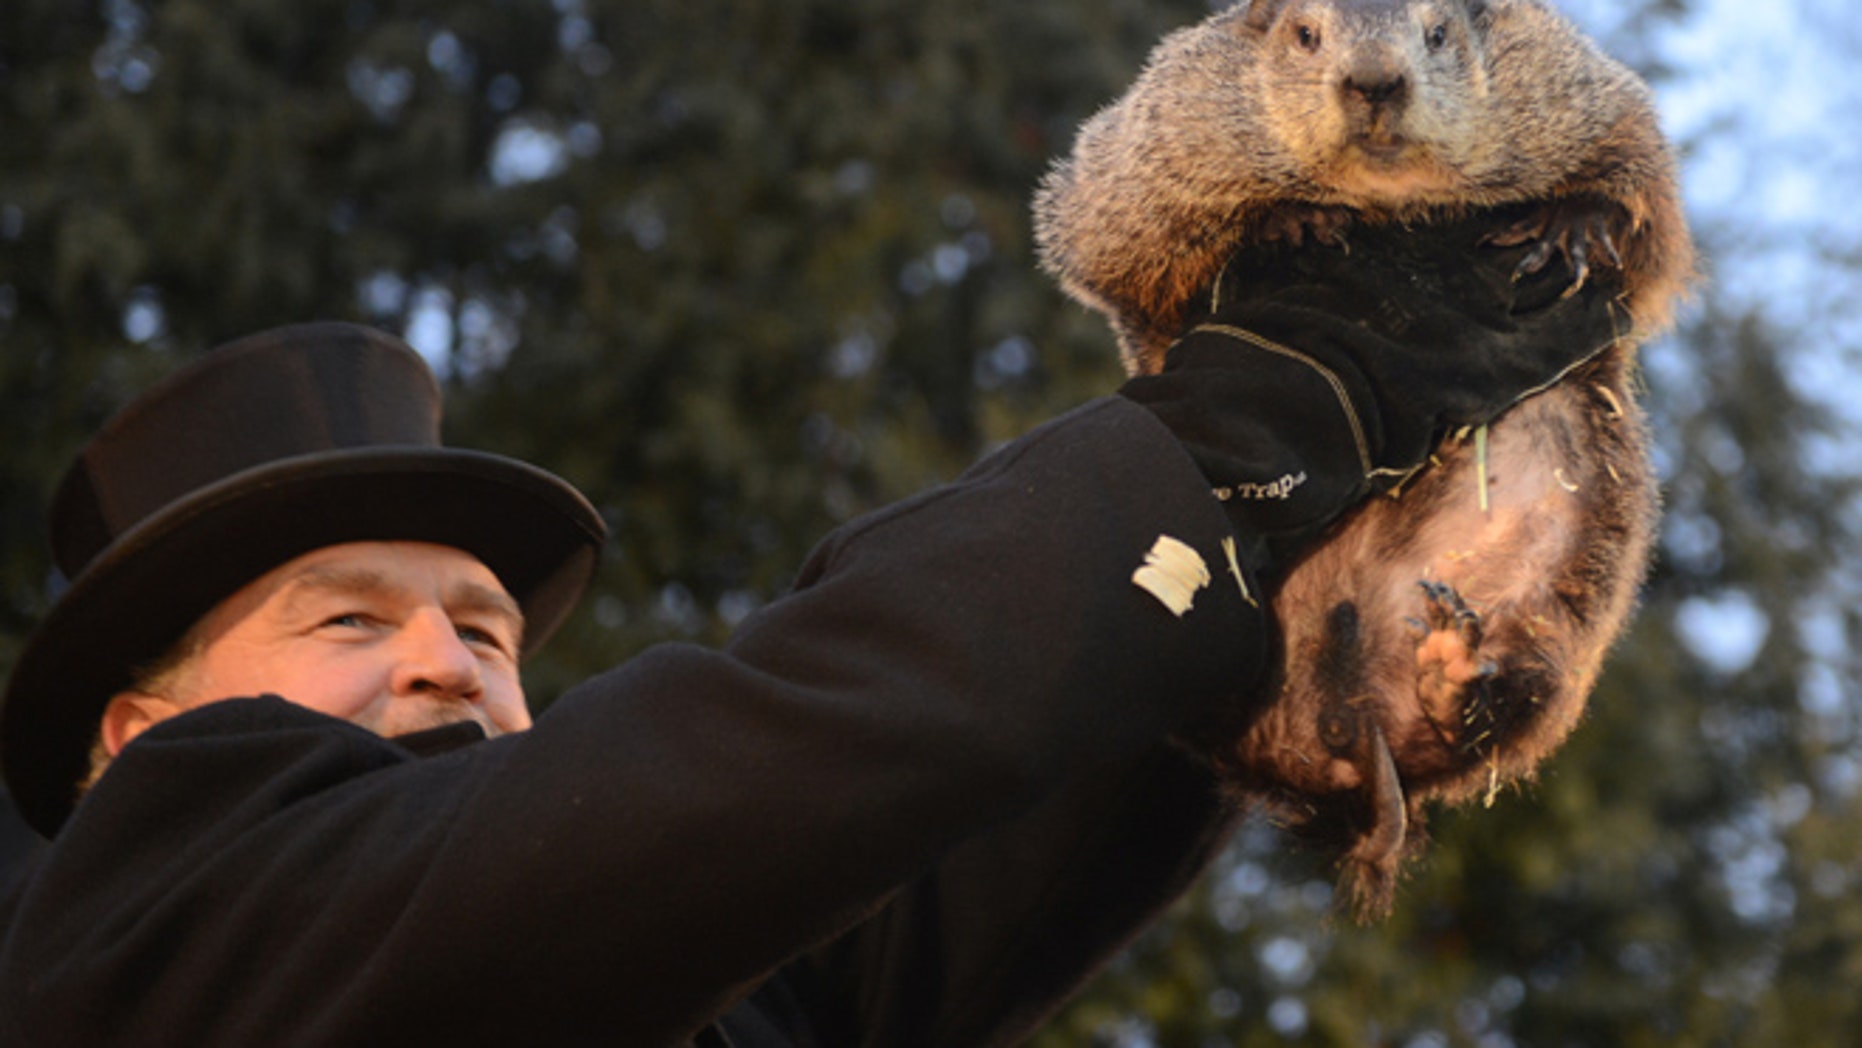 Groundhog Day festivities and a look at Punxsutawney Phil